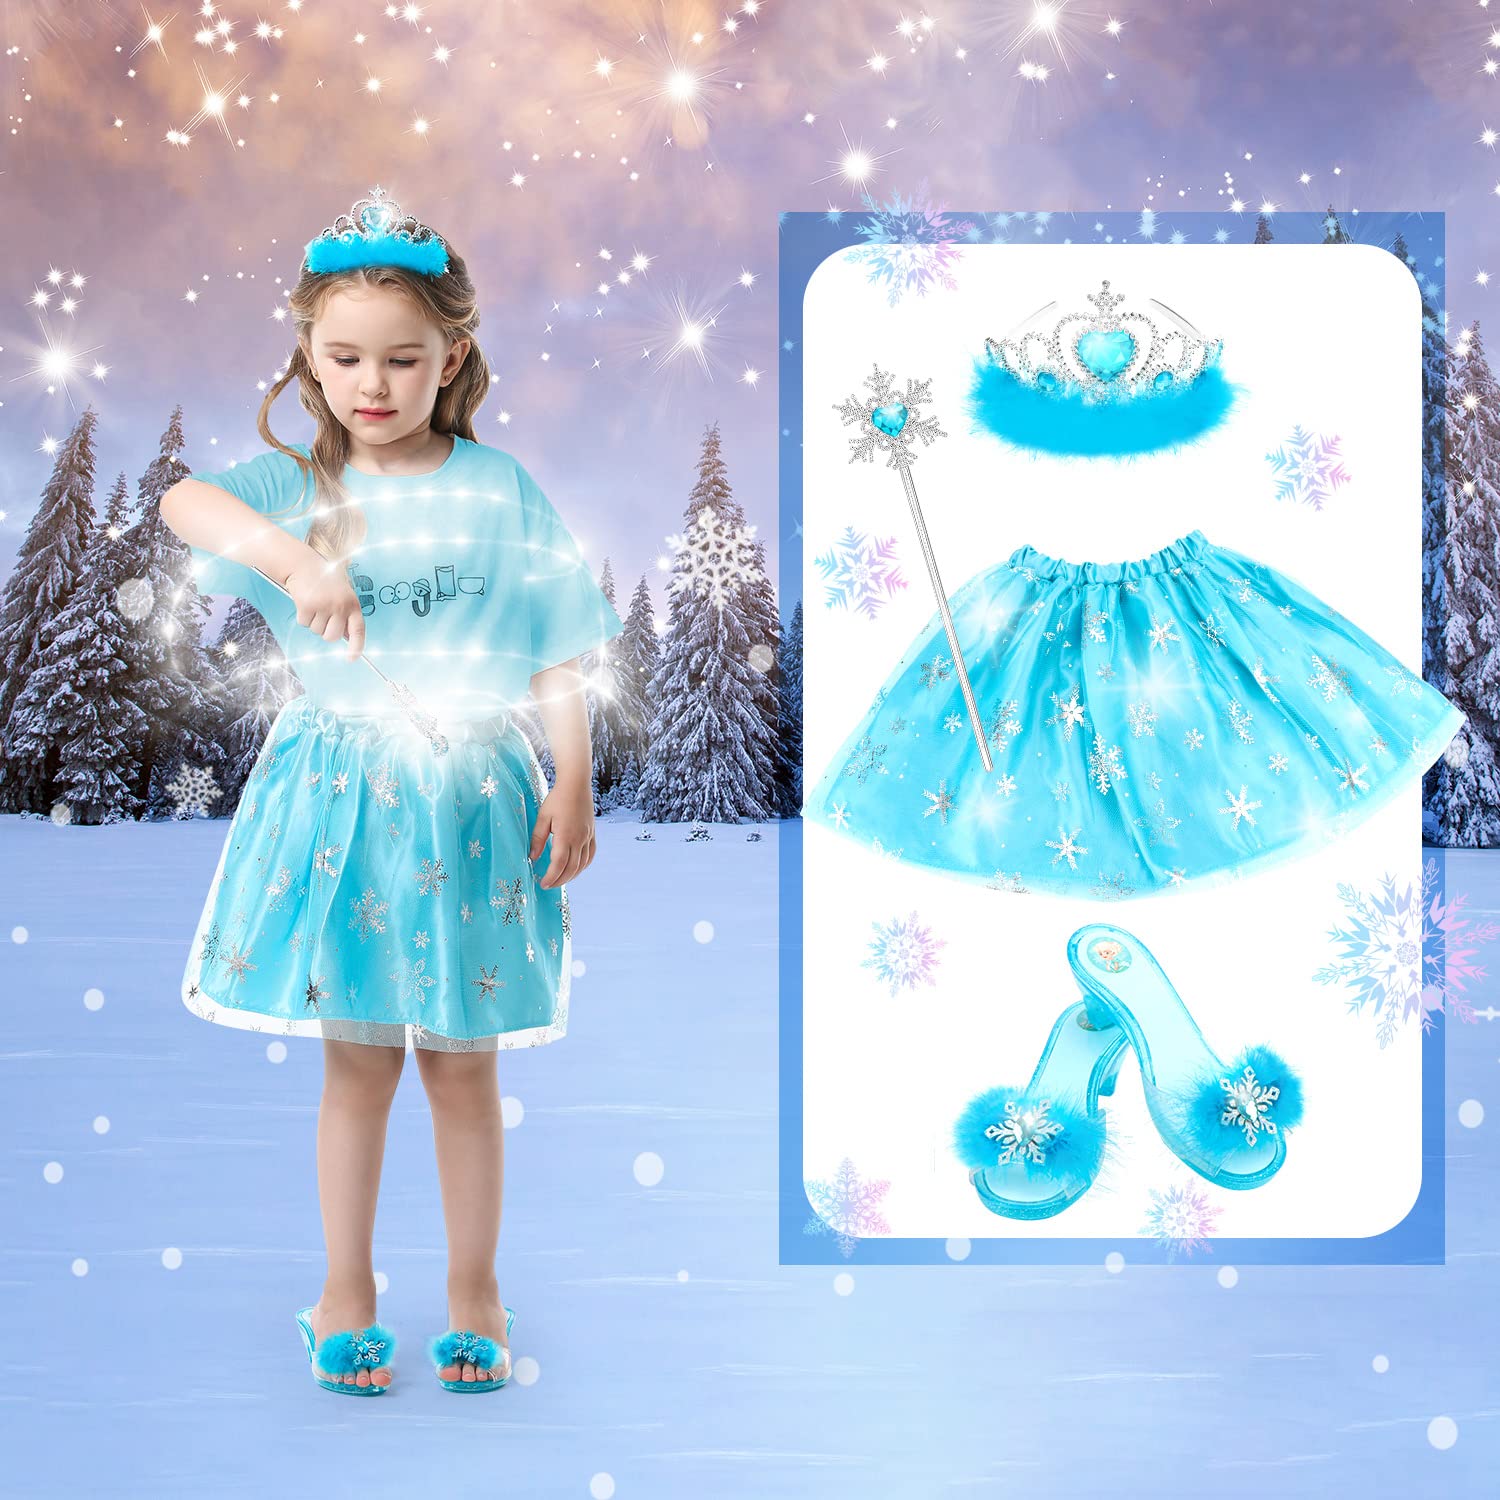 HAMSILY Princess Dress Up Shoes Set, Girls Dress Up Toys Toddler Jewelry Boutique Kit, 3 Themes of Unicorn Mermaid Ice Princess Costumes Set, Pretend Play Gifts for Little Girls Aged 3-6 Years Old